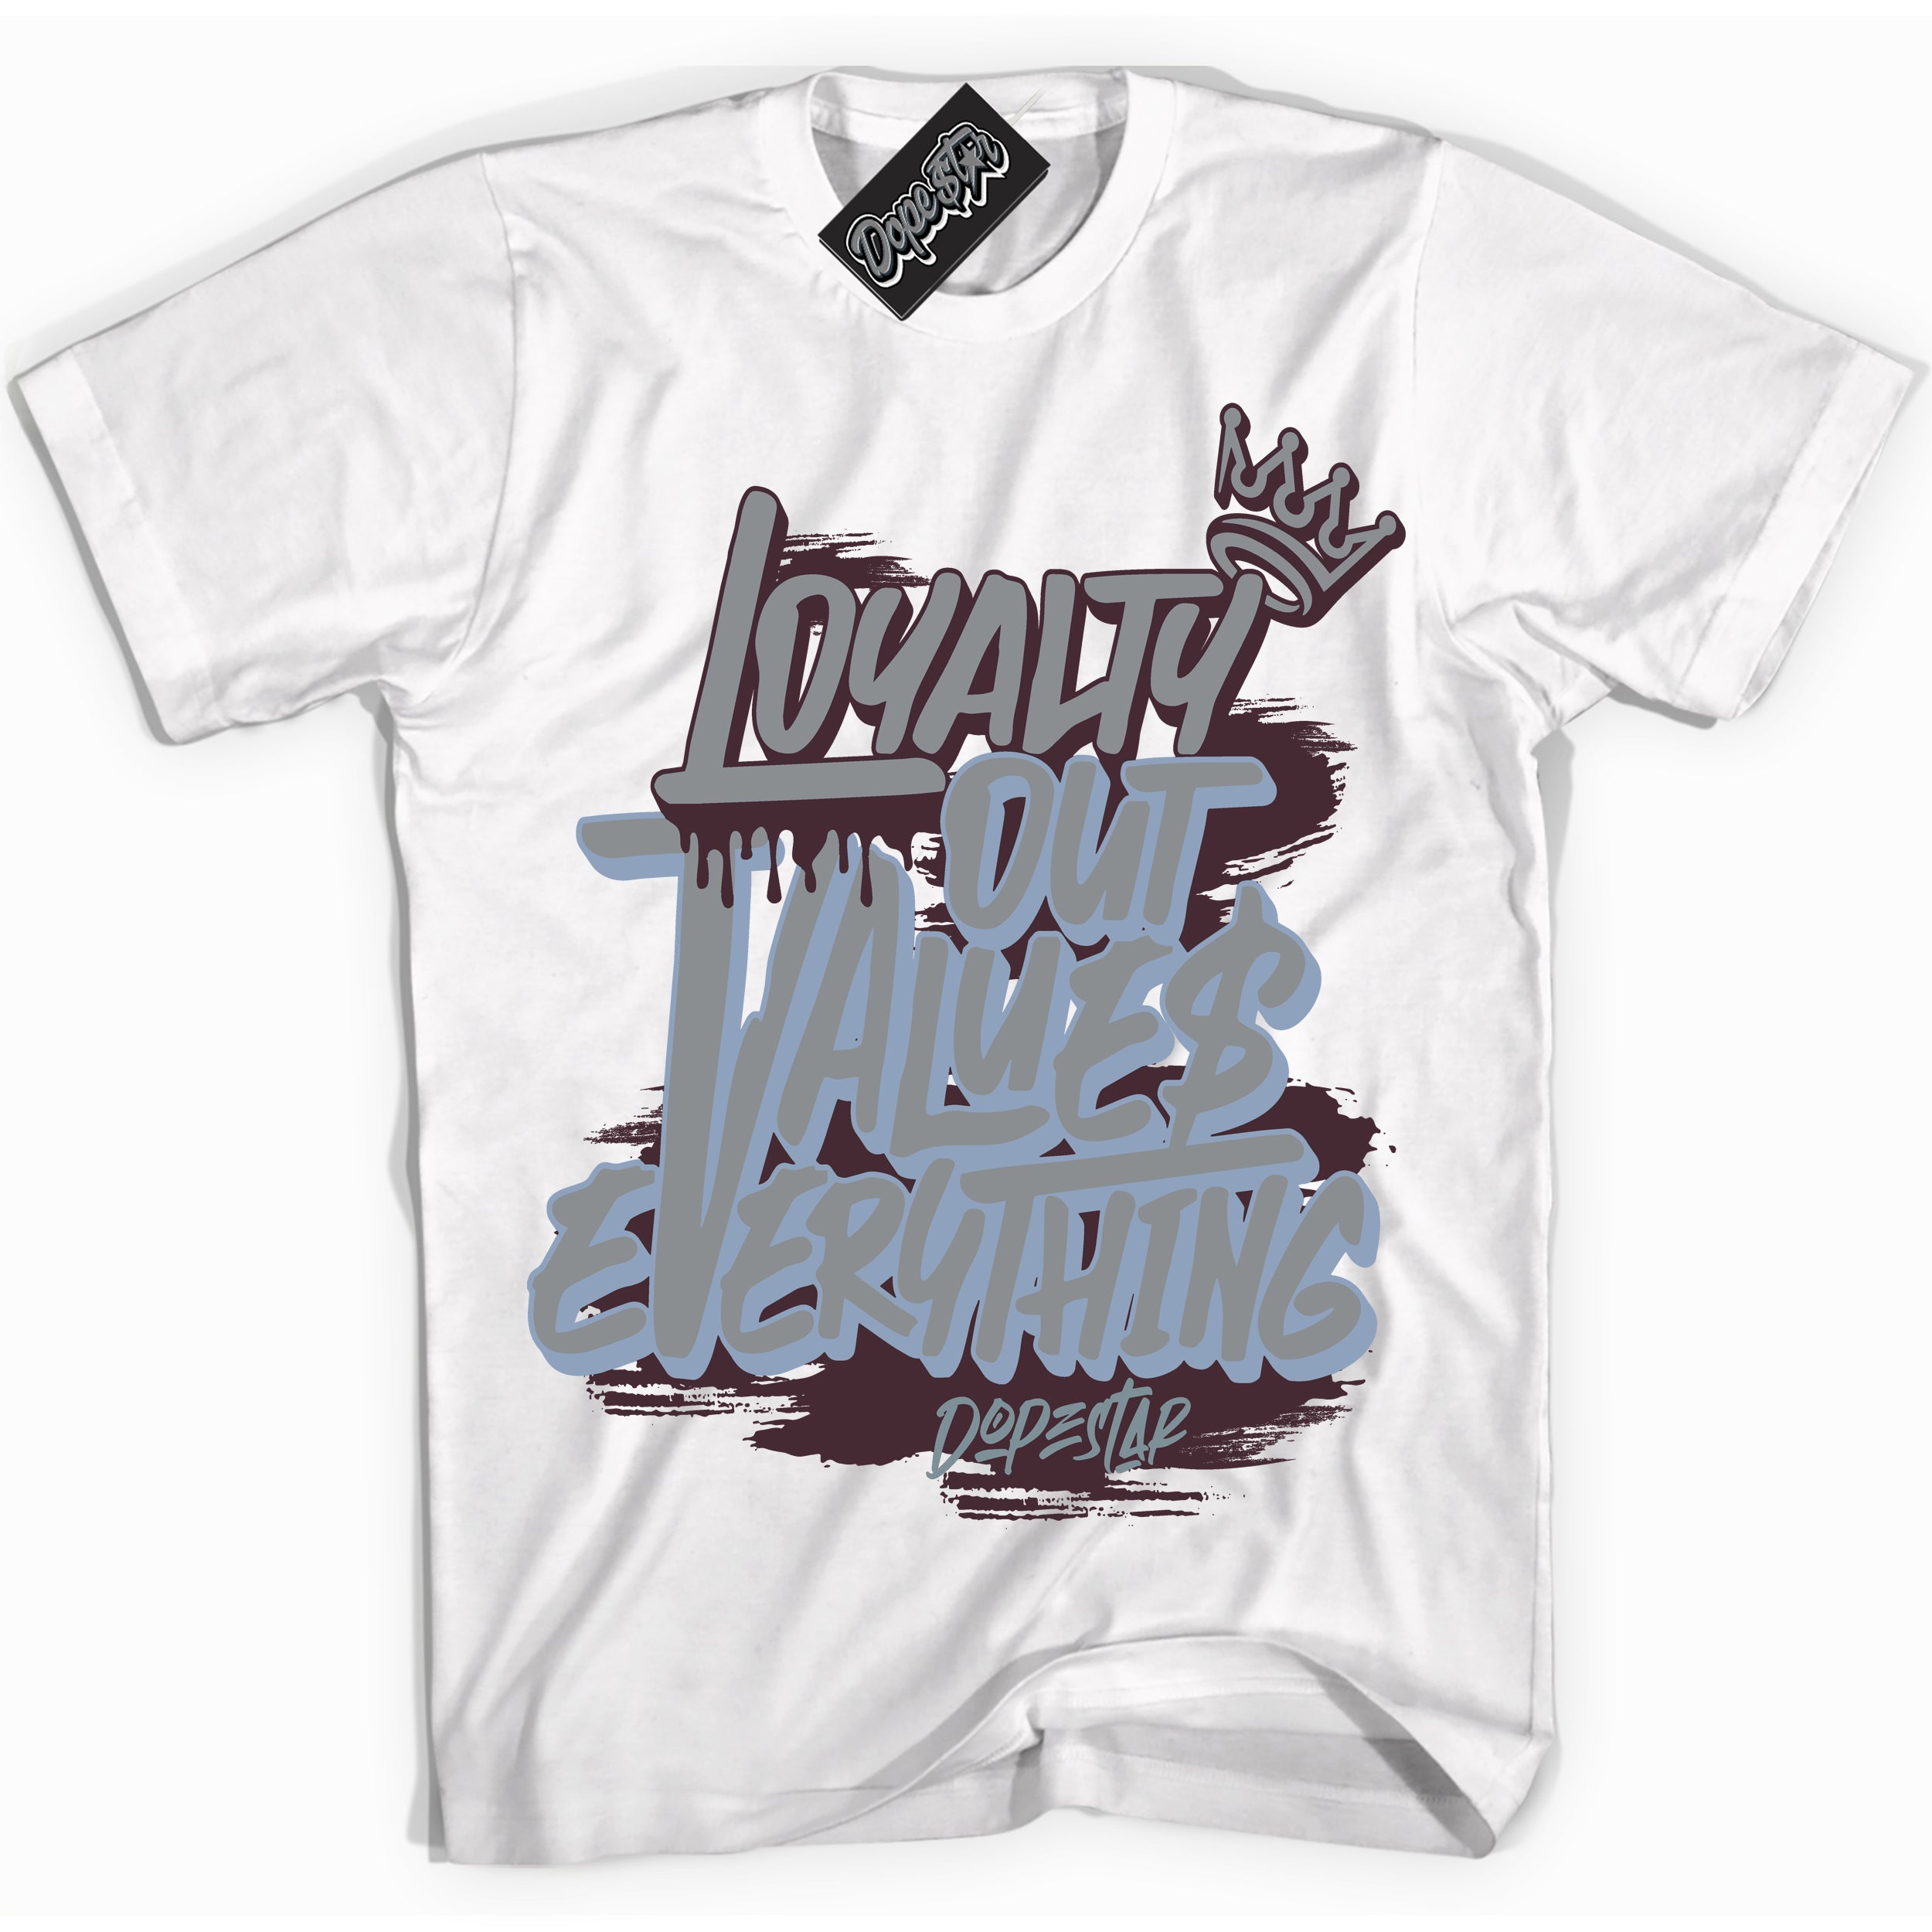 Cool White Shirt with “ Loyalty Out Values Everything” design that perfectly matches Burgundy 5s Sneakers.